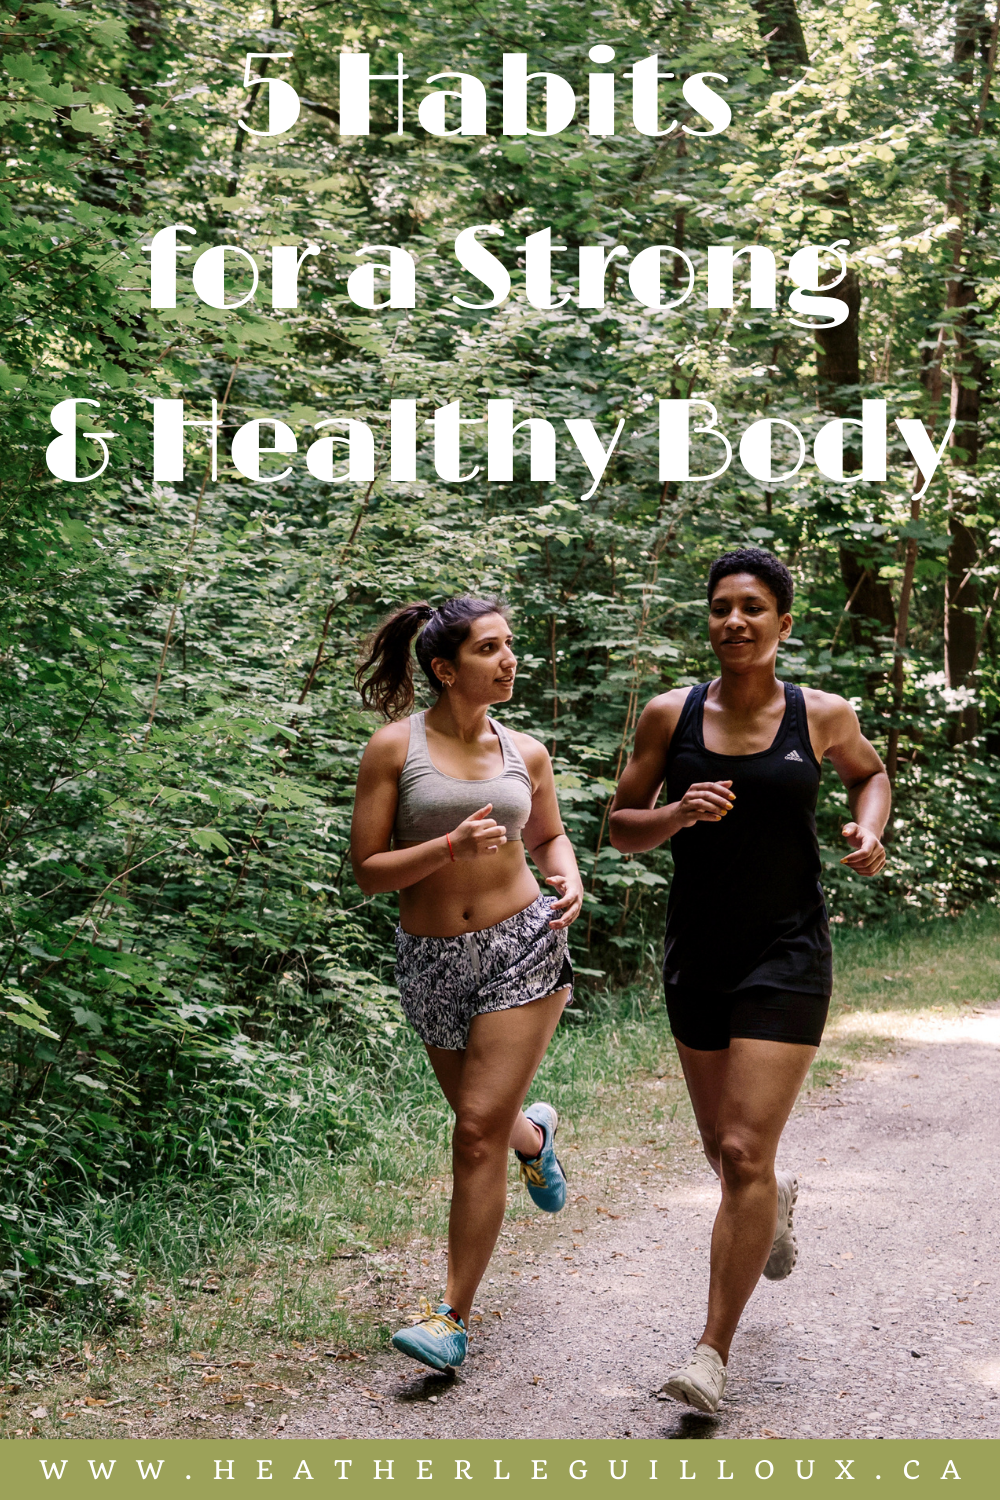 Obtaining a strong and healthy body that you have always dreamed of can be a difficult task and it can be hard to figure out how to even get started on this journey. It takes hard work and dedication to see your goal through in a realistic way, but it is possible! In this blog post, we will talk about five habits to achieve your goals of health and wellness for a strong and healthy body. #strong #healthy #goodhabits #healthandwellness